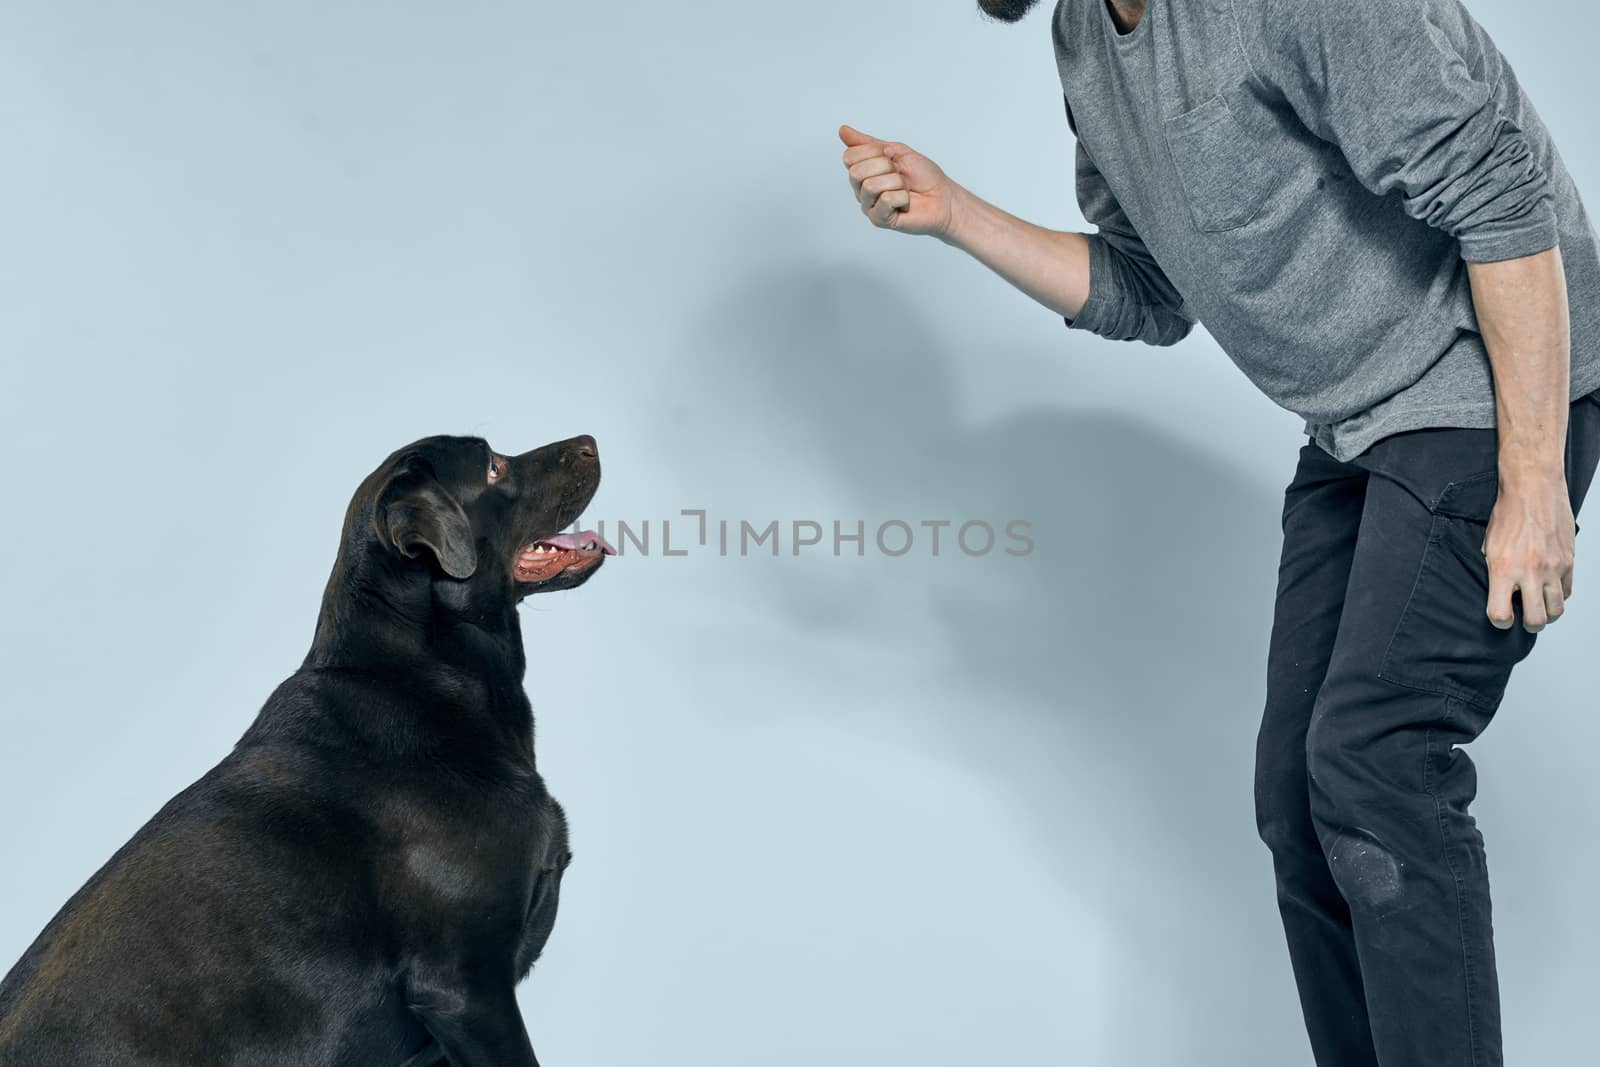 The man trains the dog indoors and gestures with his hands to execute the model's commands by SHOTPRIME